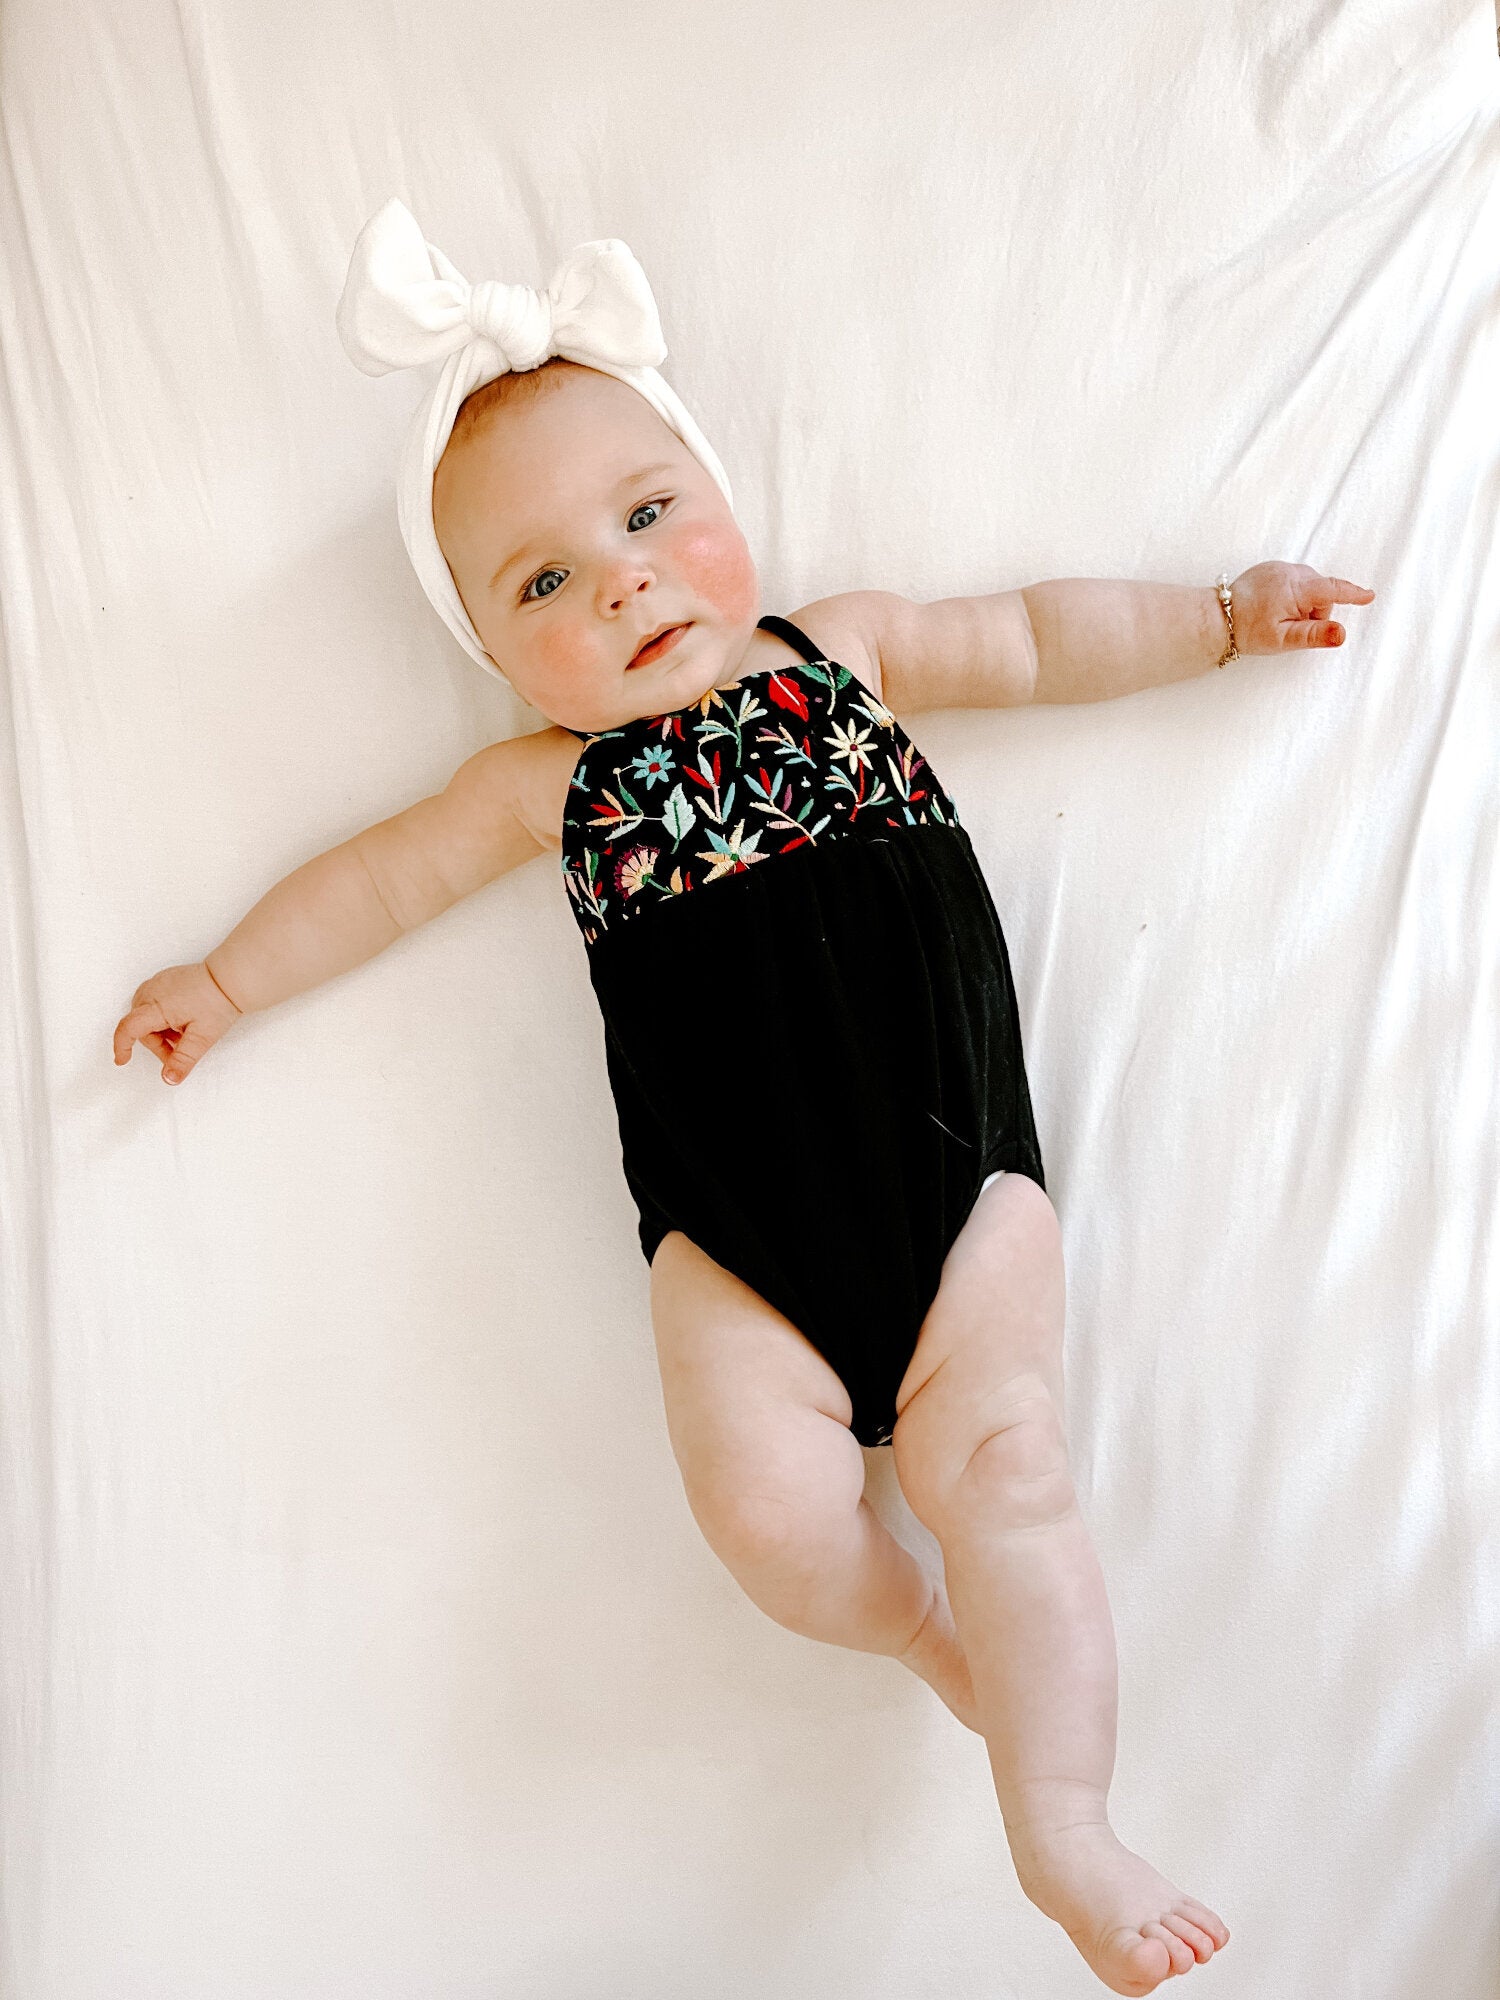 L'ovedbaby Embroidered Criss-Cross Bodysuit